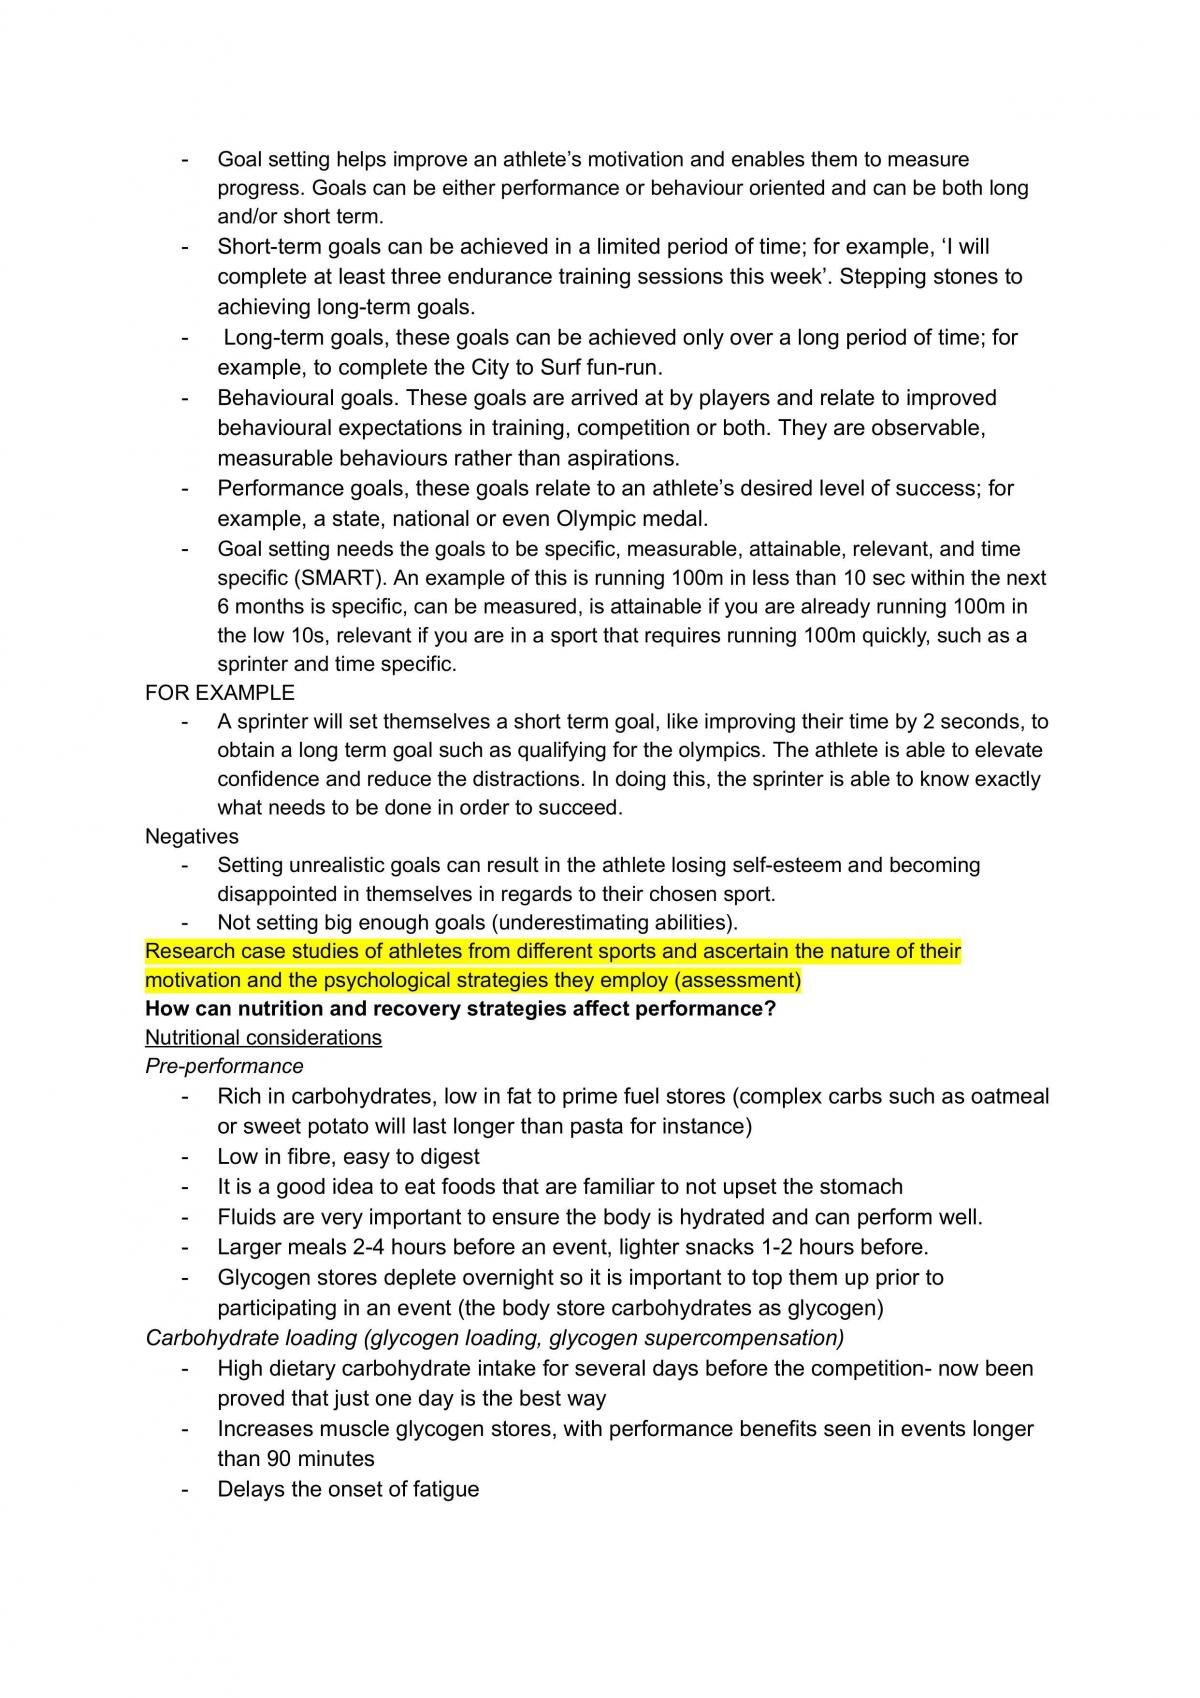 Full set of HSC PDHPE NOTES - Page 40